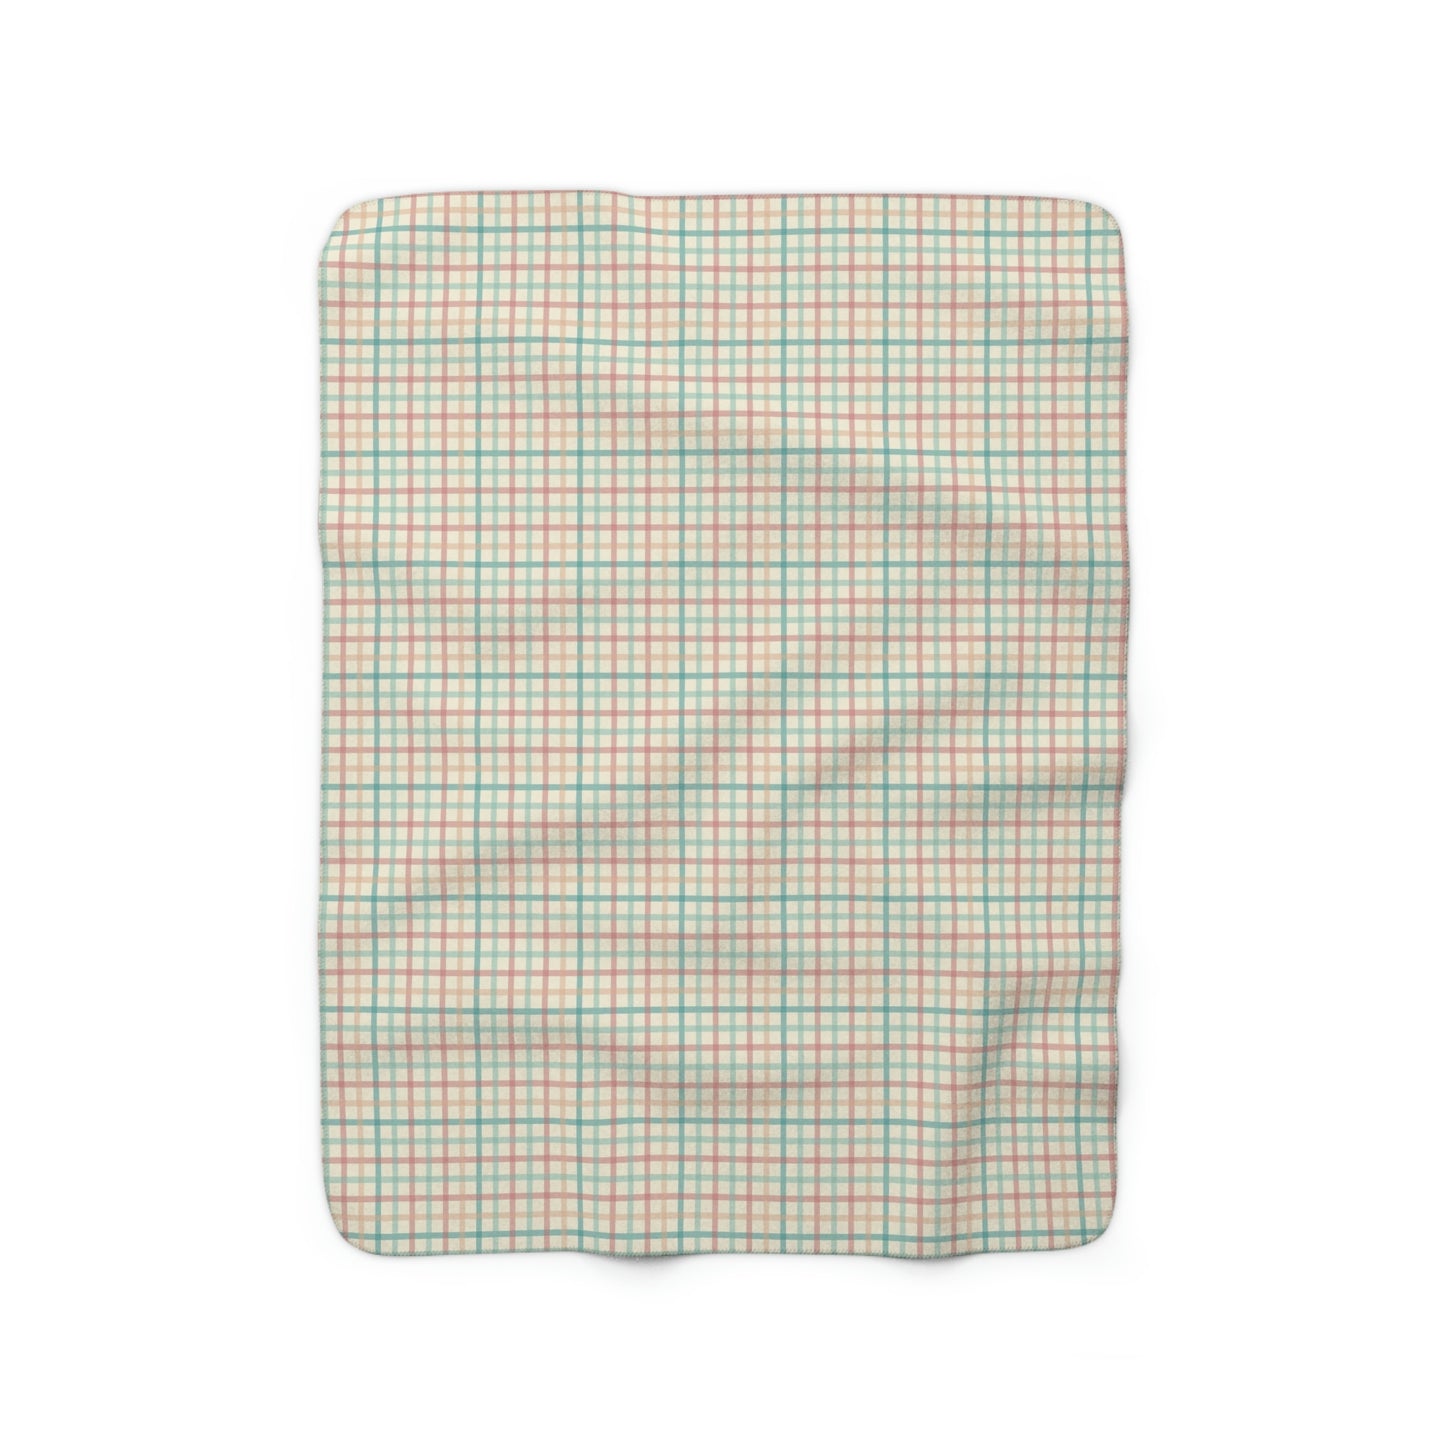 sherpa blanket with gingham pattern, red, blue, green and coral checkered pattern